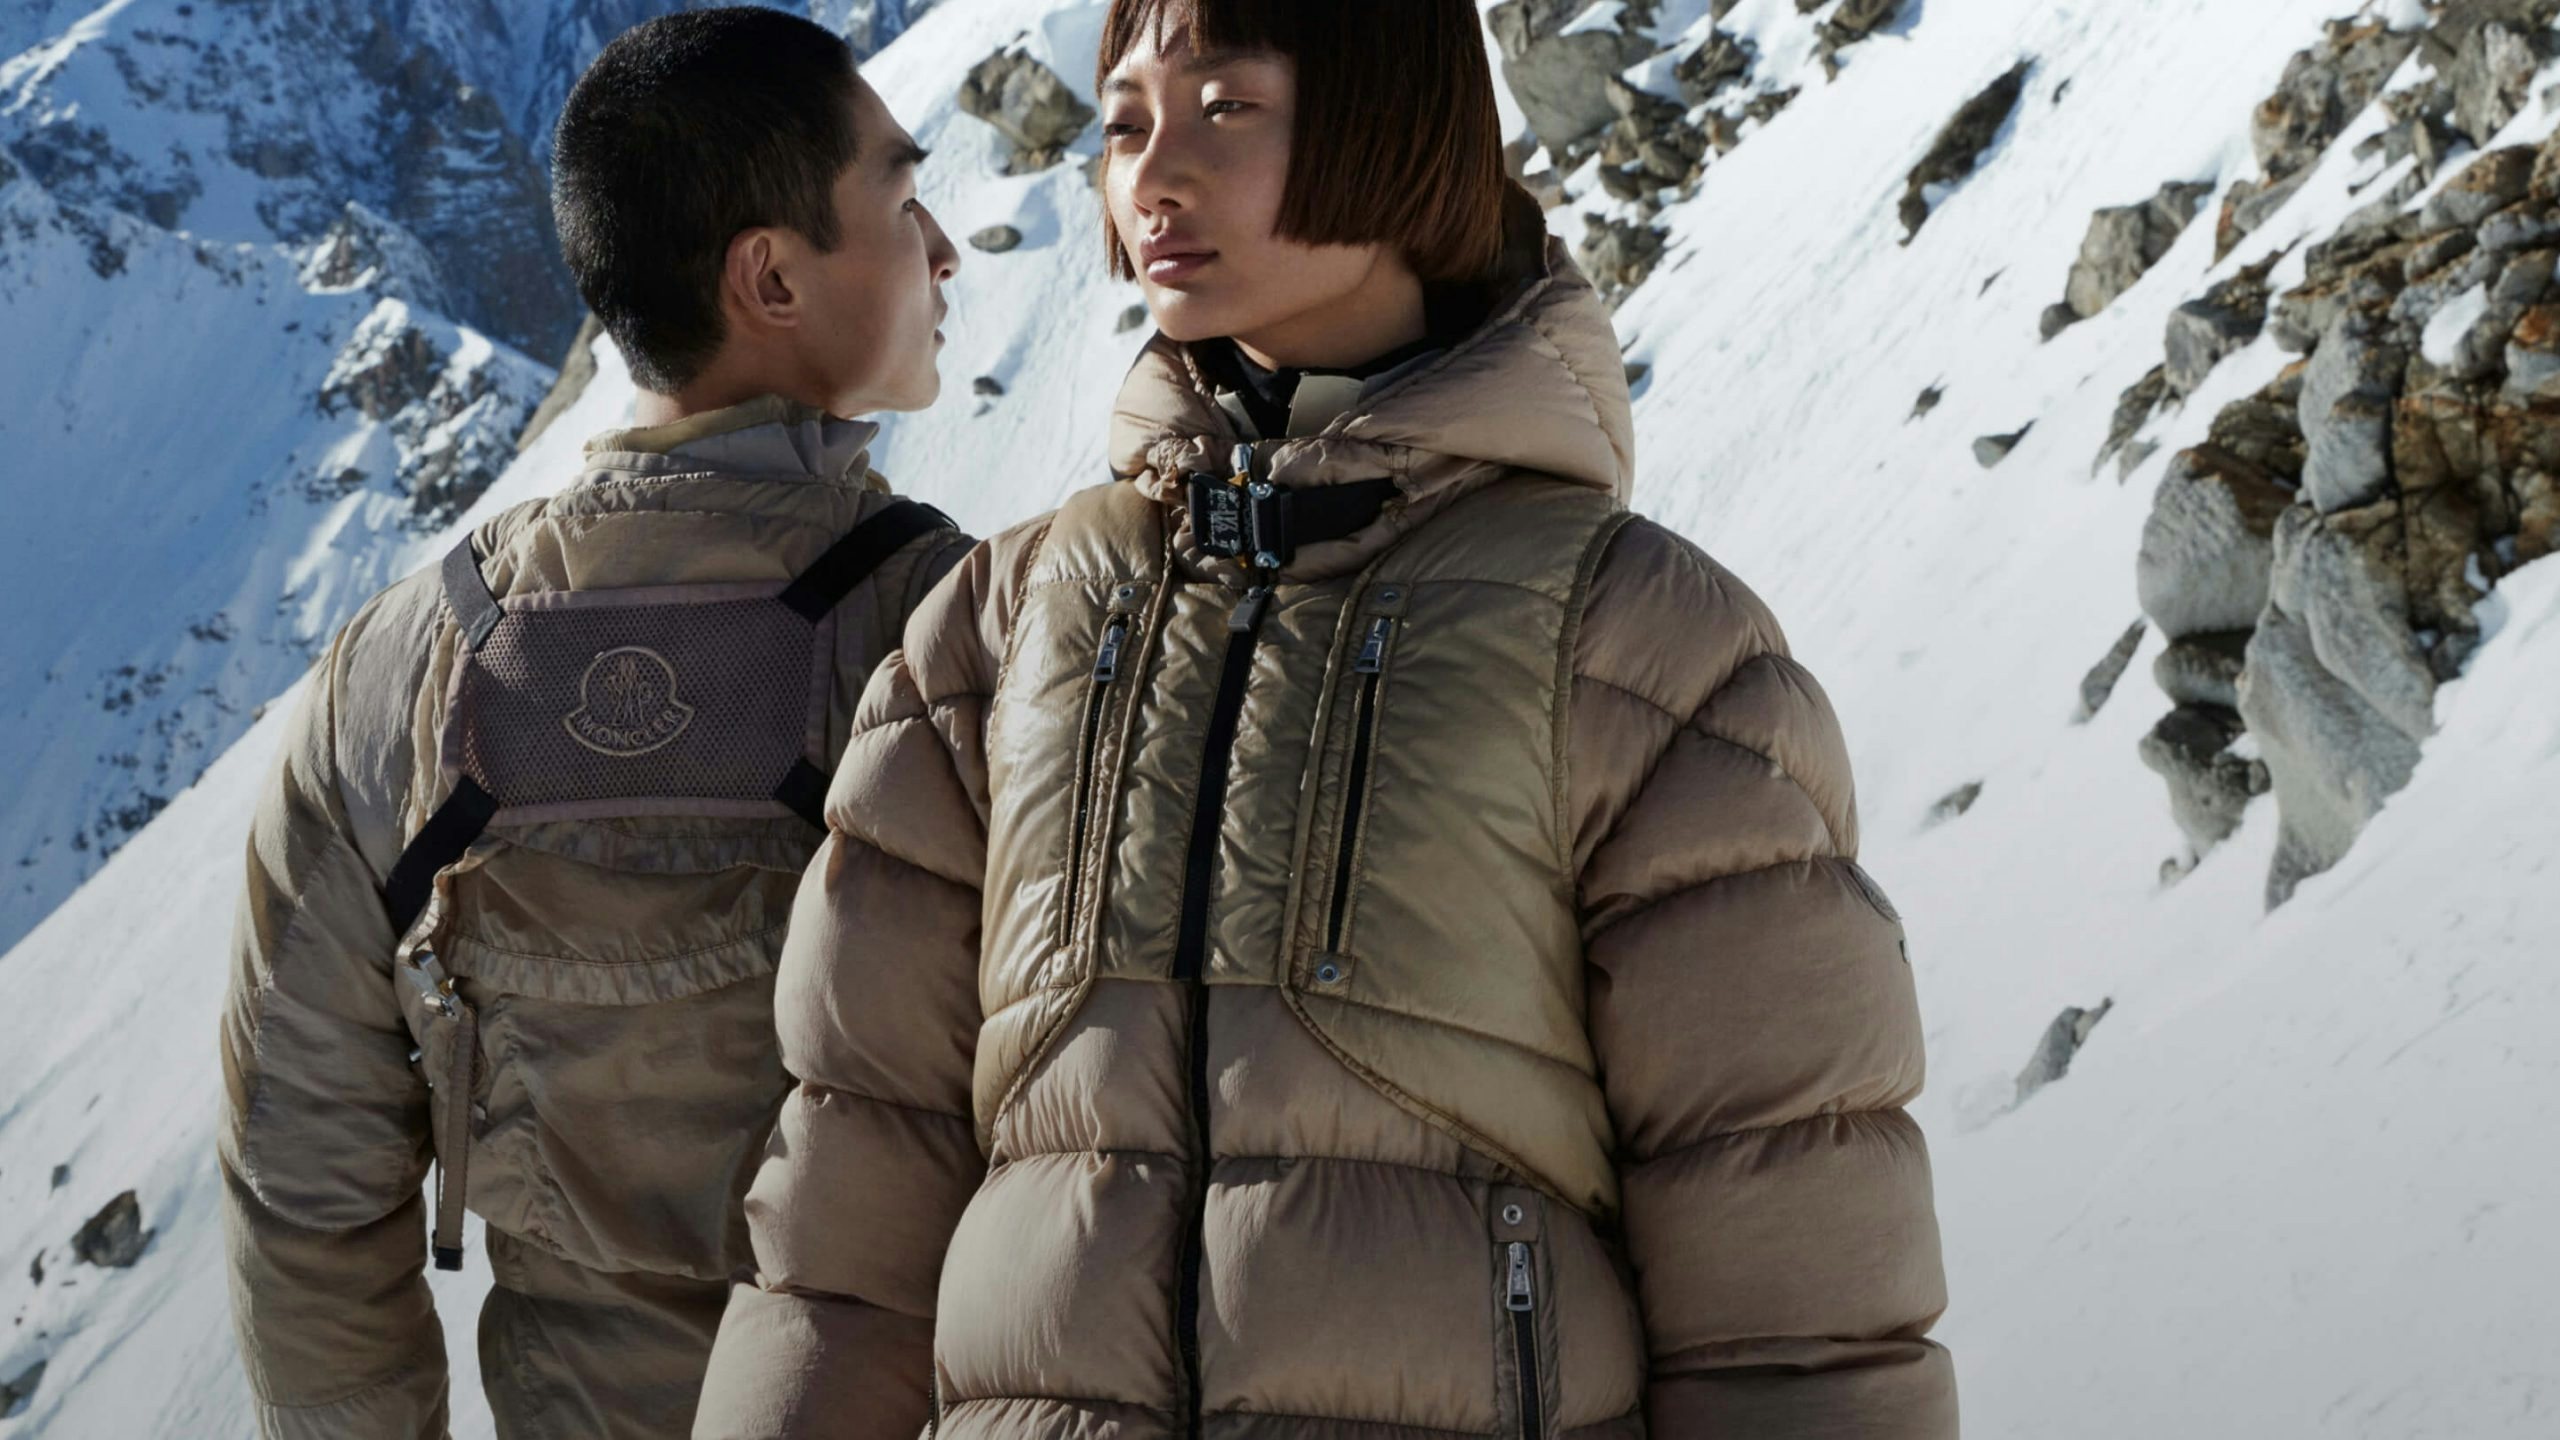 Moncler has announced that it will acquire the luxury brand Stone Island, perhaps signaling that it wants to compete with rivals LVMH and Kering. Photo: Courtesy of Moncler 